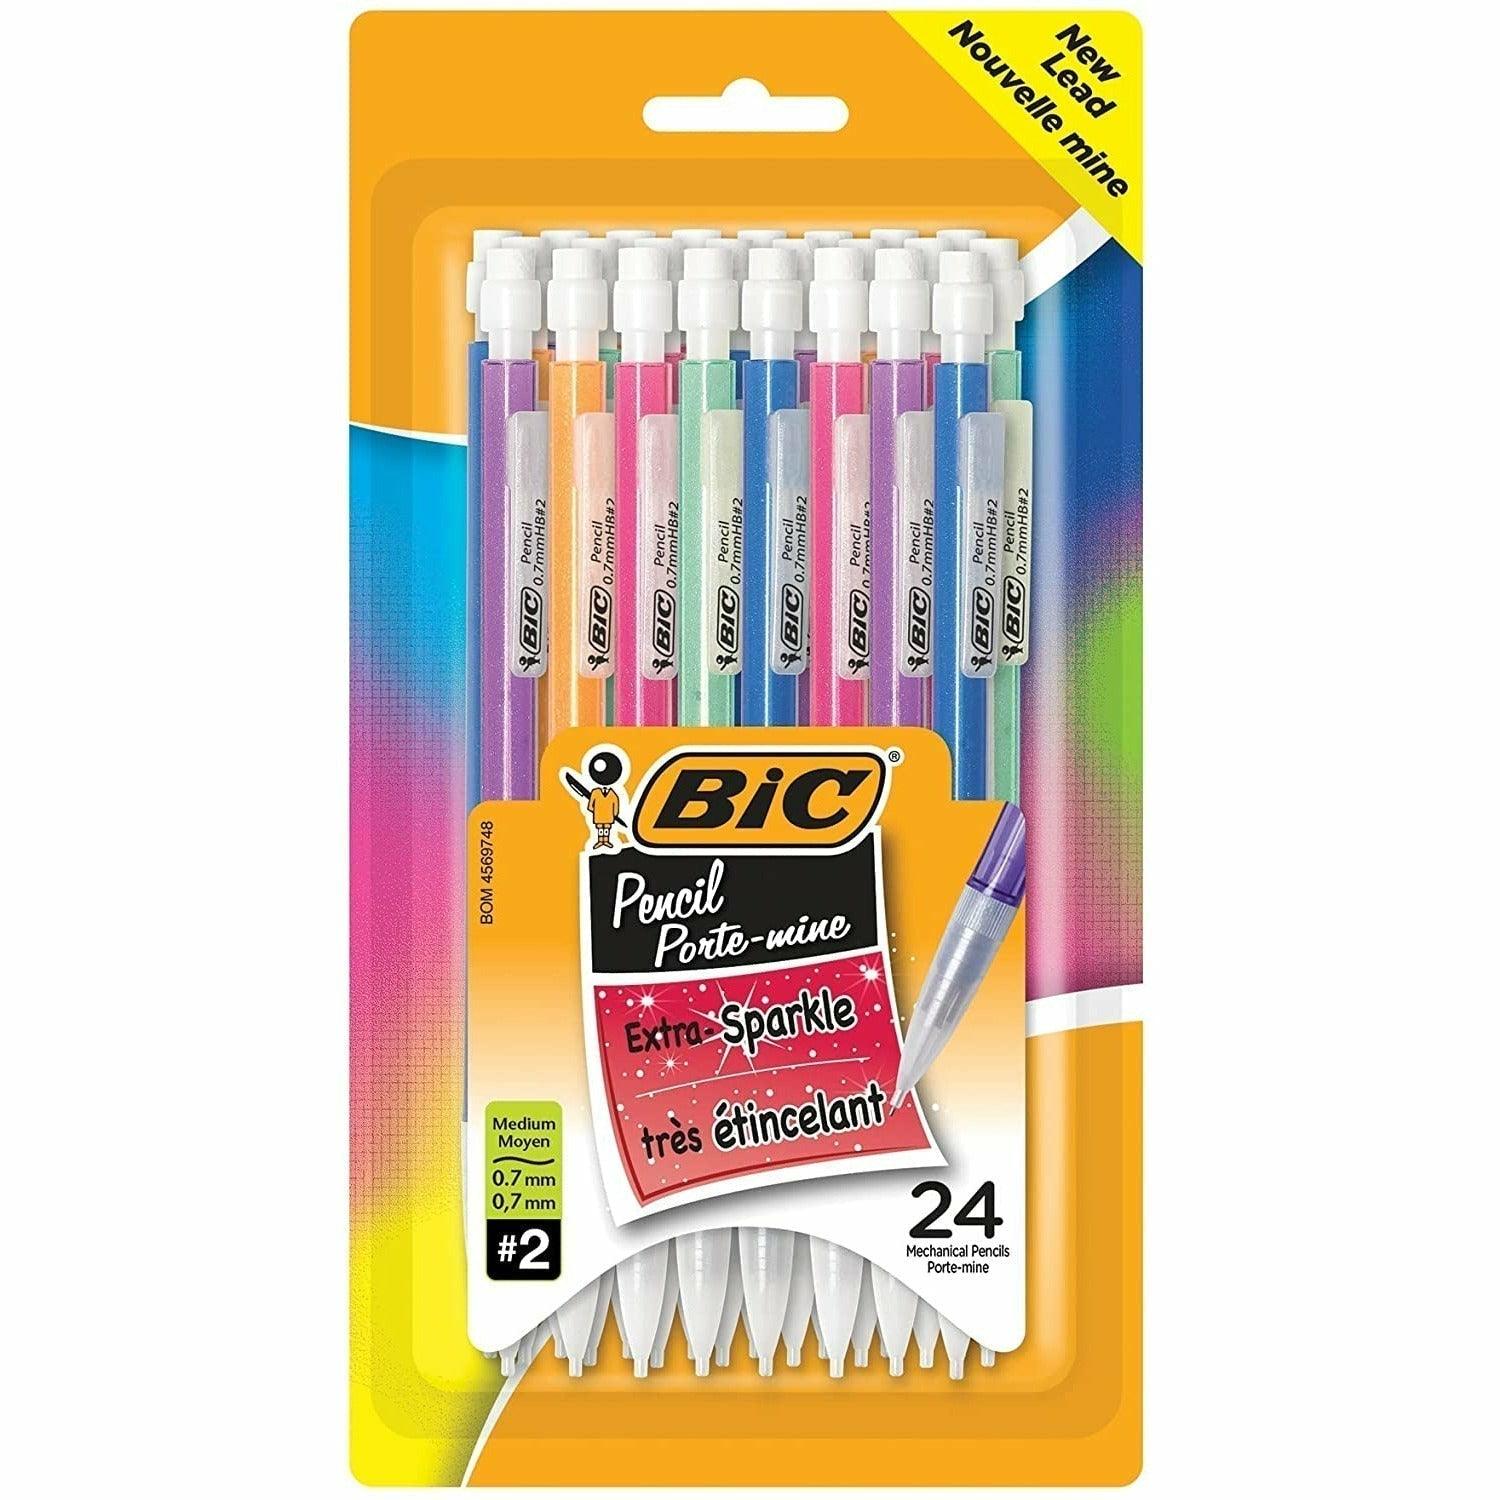 BIC Xtra-Sparkle Mechanical Pencil, Medium Point (0.7 mm), 24-Count, Refillable Design for Long-Lasting Use - BumbleToys - 5-7 Years, Drawing & Painting, Pencil, School Supplies, Stationery & Stickers